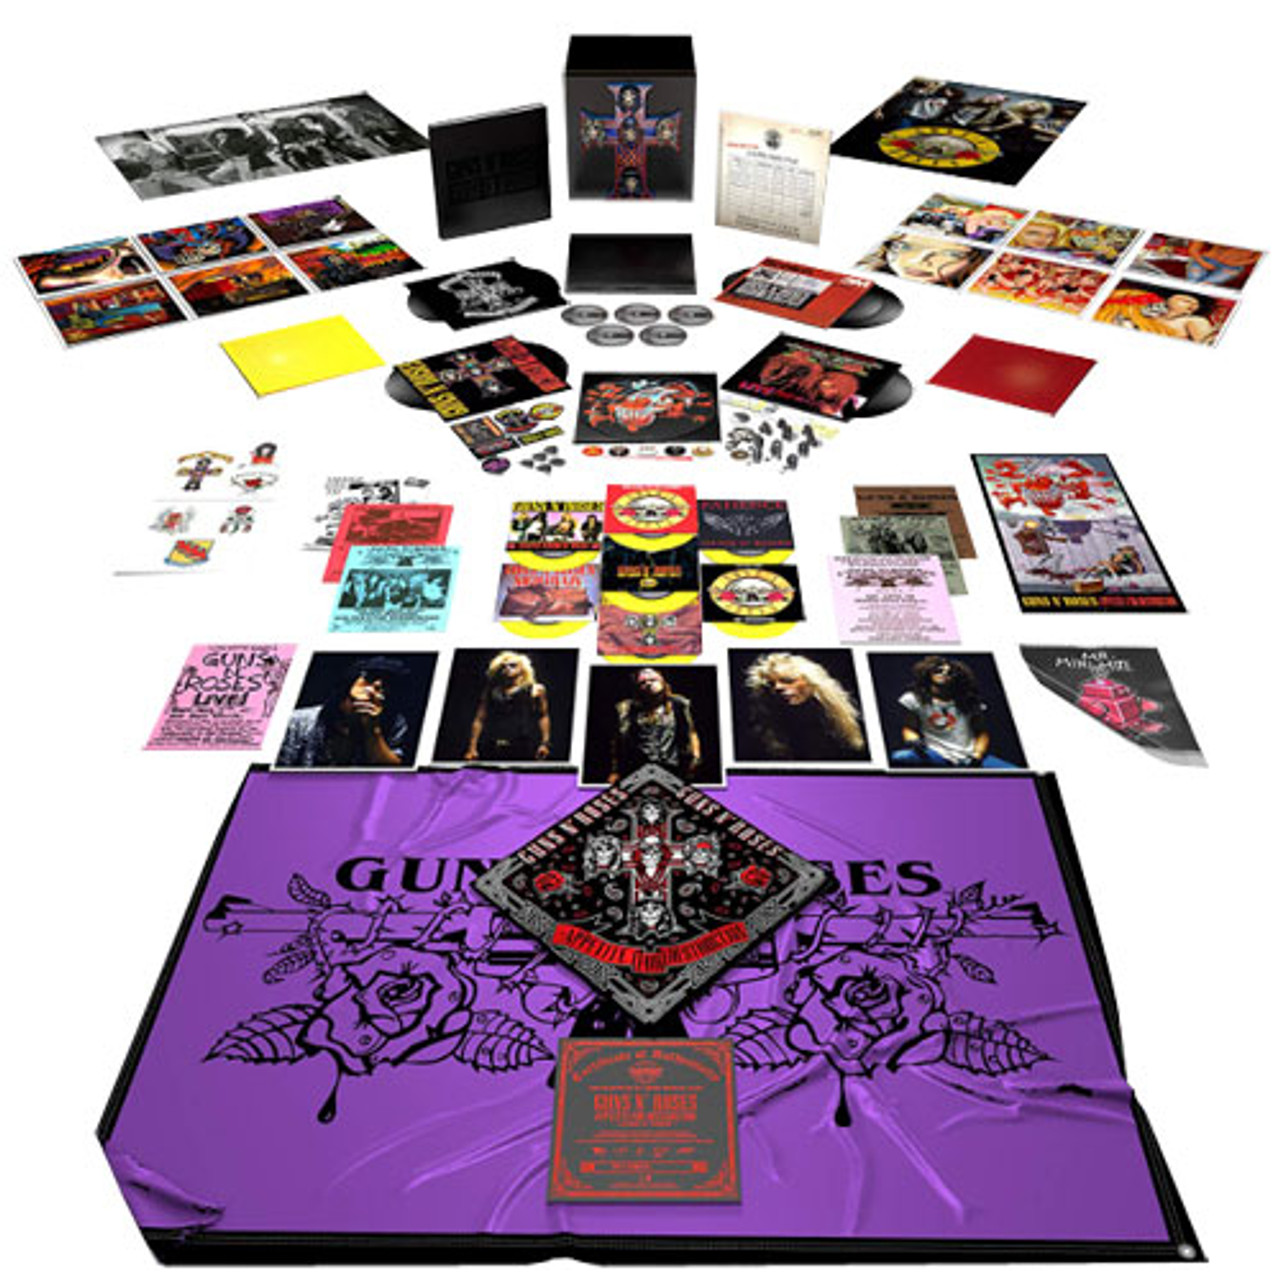 Appetite for destruction ( deluxe edition: 2 cd, slipcase, digisleeve ) by Guns  N' Roses, CD x 2 with CED.Records - Ref:120223629